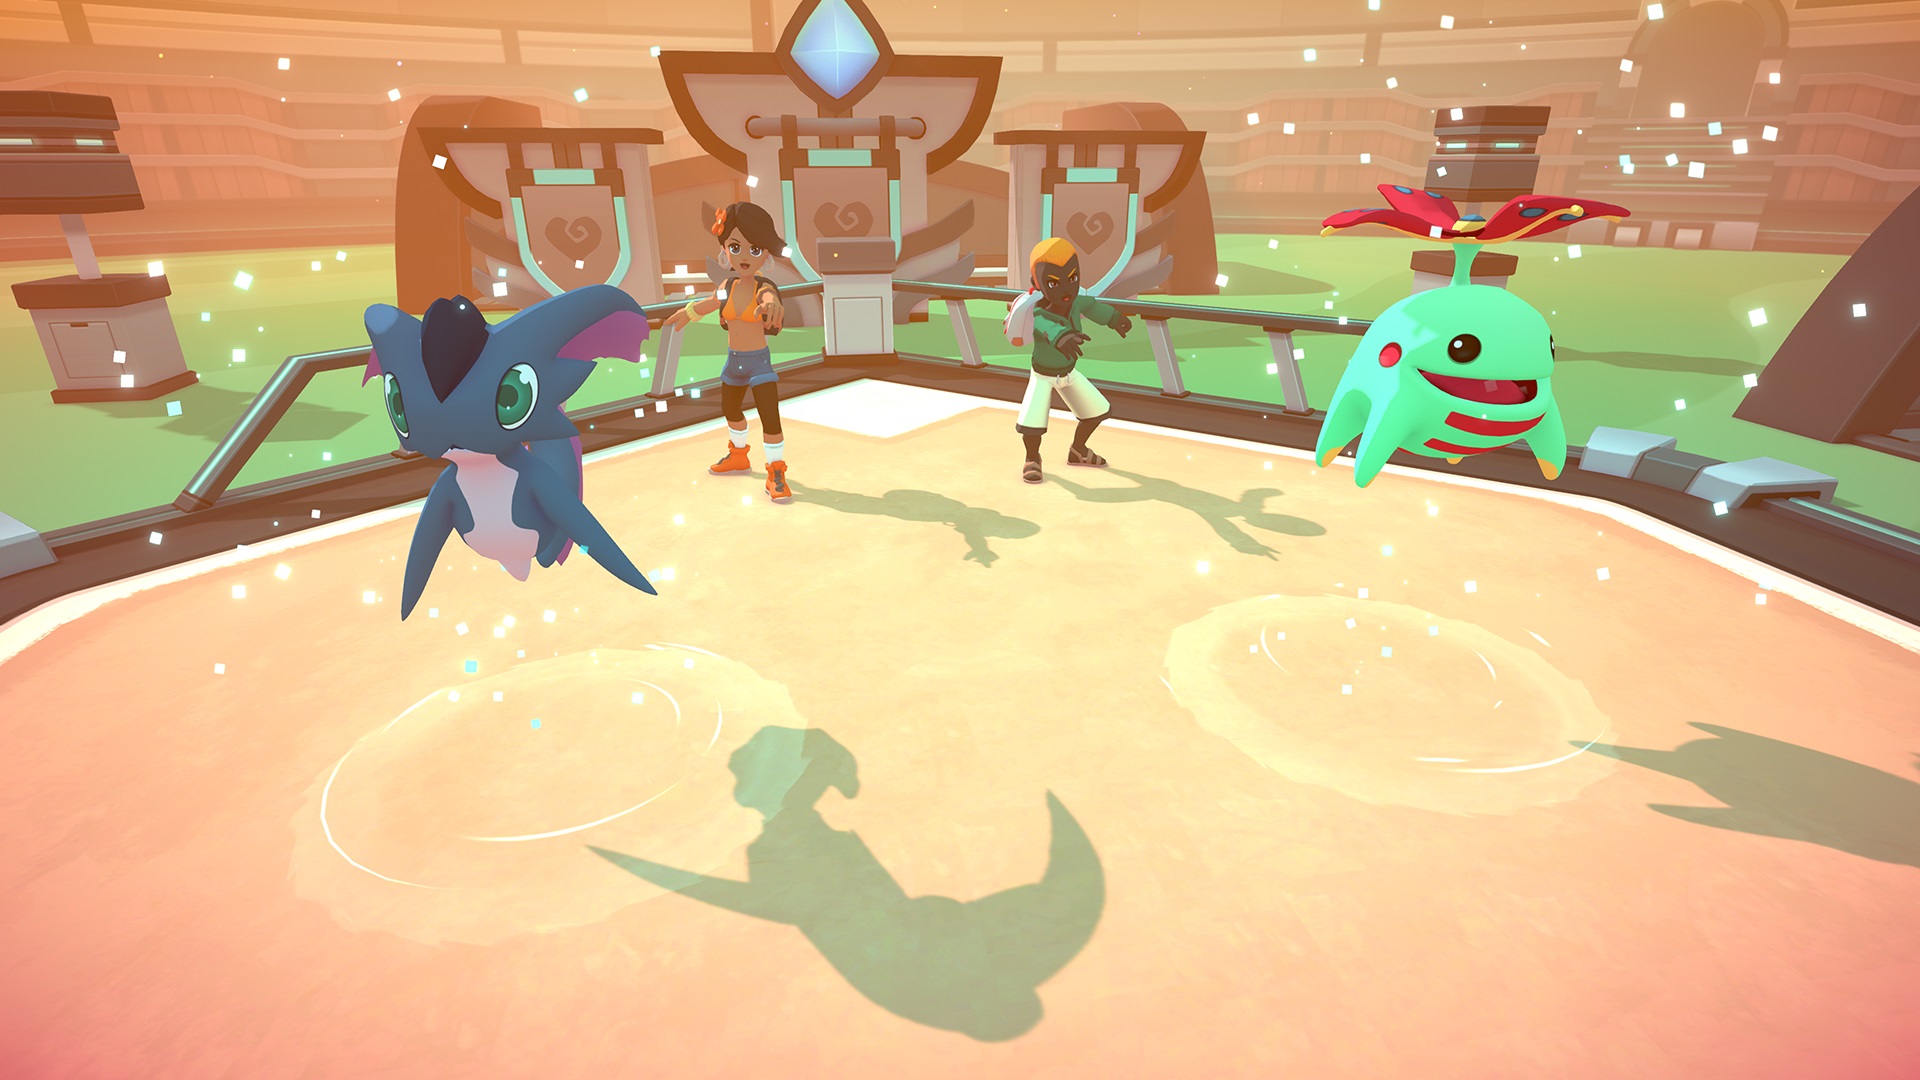 Pokémon players have always wanted one battle feature, and Temtem